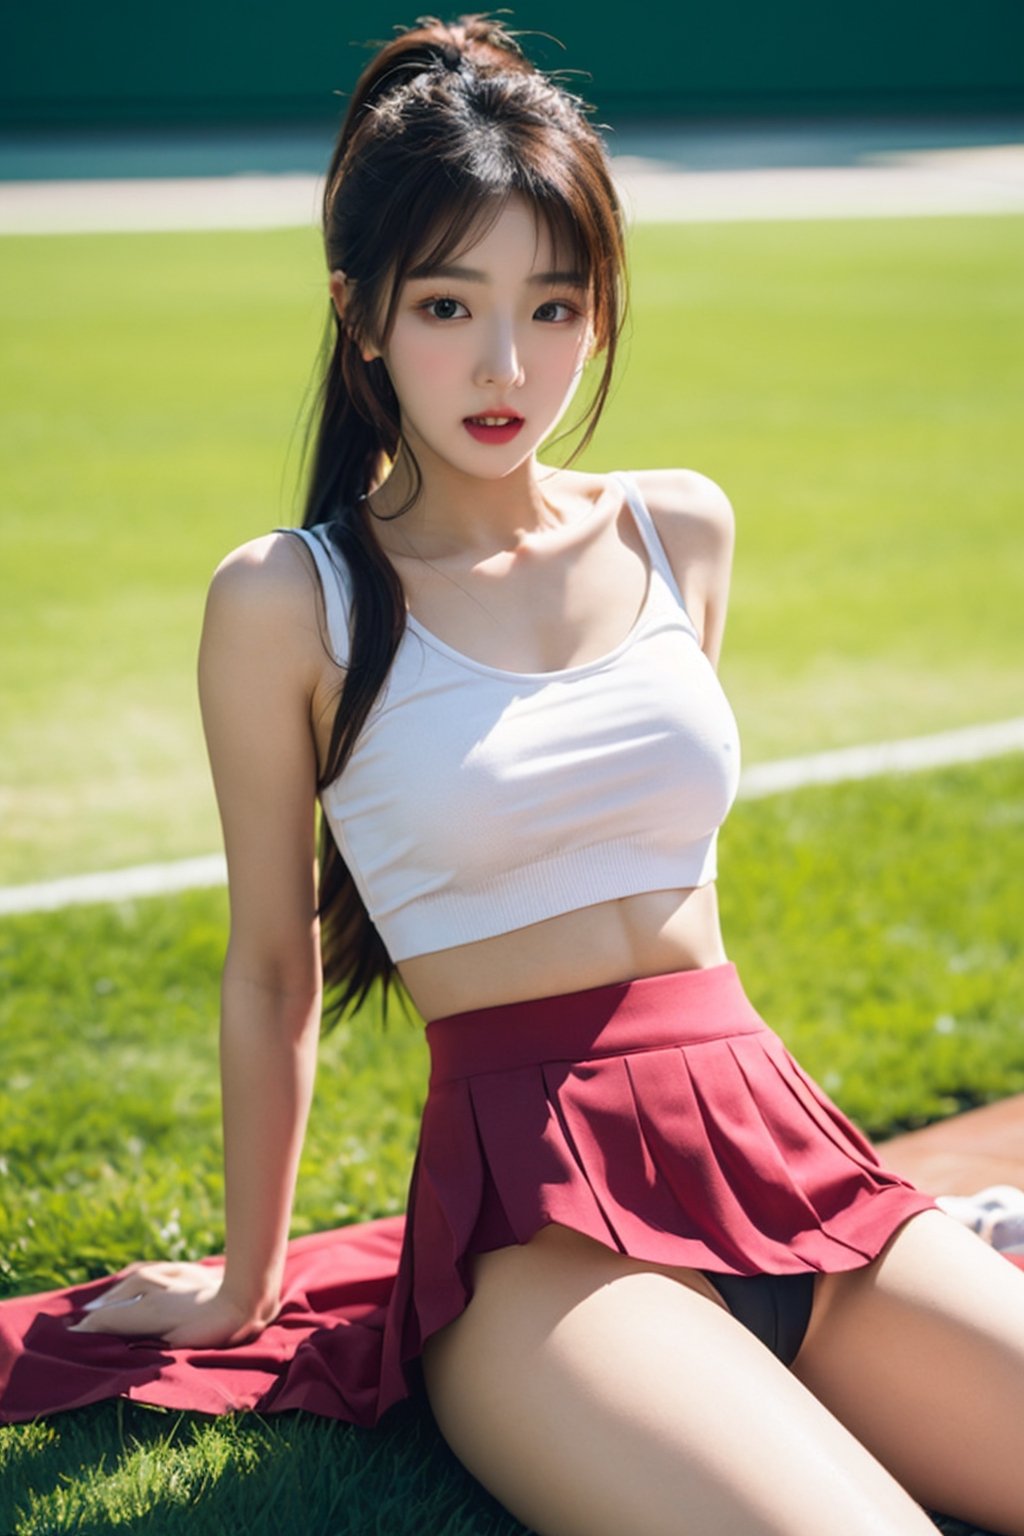 20 years old korean girl, korean idol style,masterpiece, best quality, photorealistic, raw photo, 1_girls,long_ponytail,medium_breasts,sexy pose,naked,unclothed,nippels,tennis skirt,detailed skin, pore, low key,
a green lawn,real hands,spreading_leg,very wide spreading leg,female_masturbation,masterbating,jerking_off,pussy,pussy_lips,seducing_face,seductive_pose,on_stomach,little_cute_girl,blurry_light_background,Korean,Beauty,Sexy